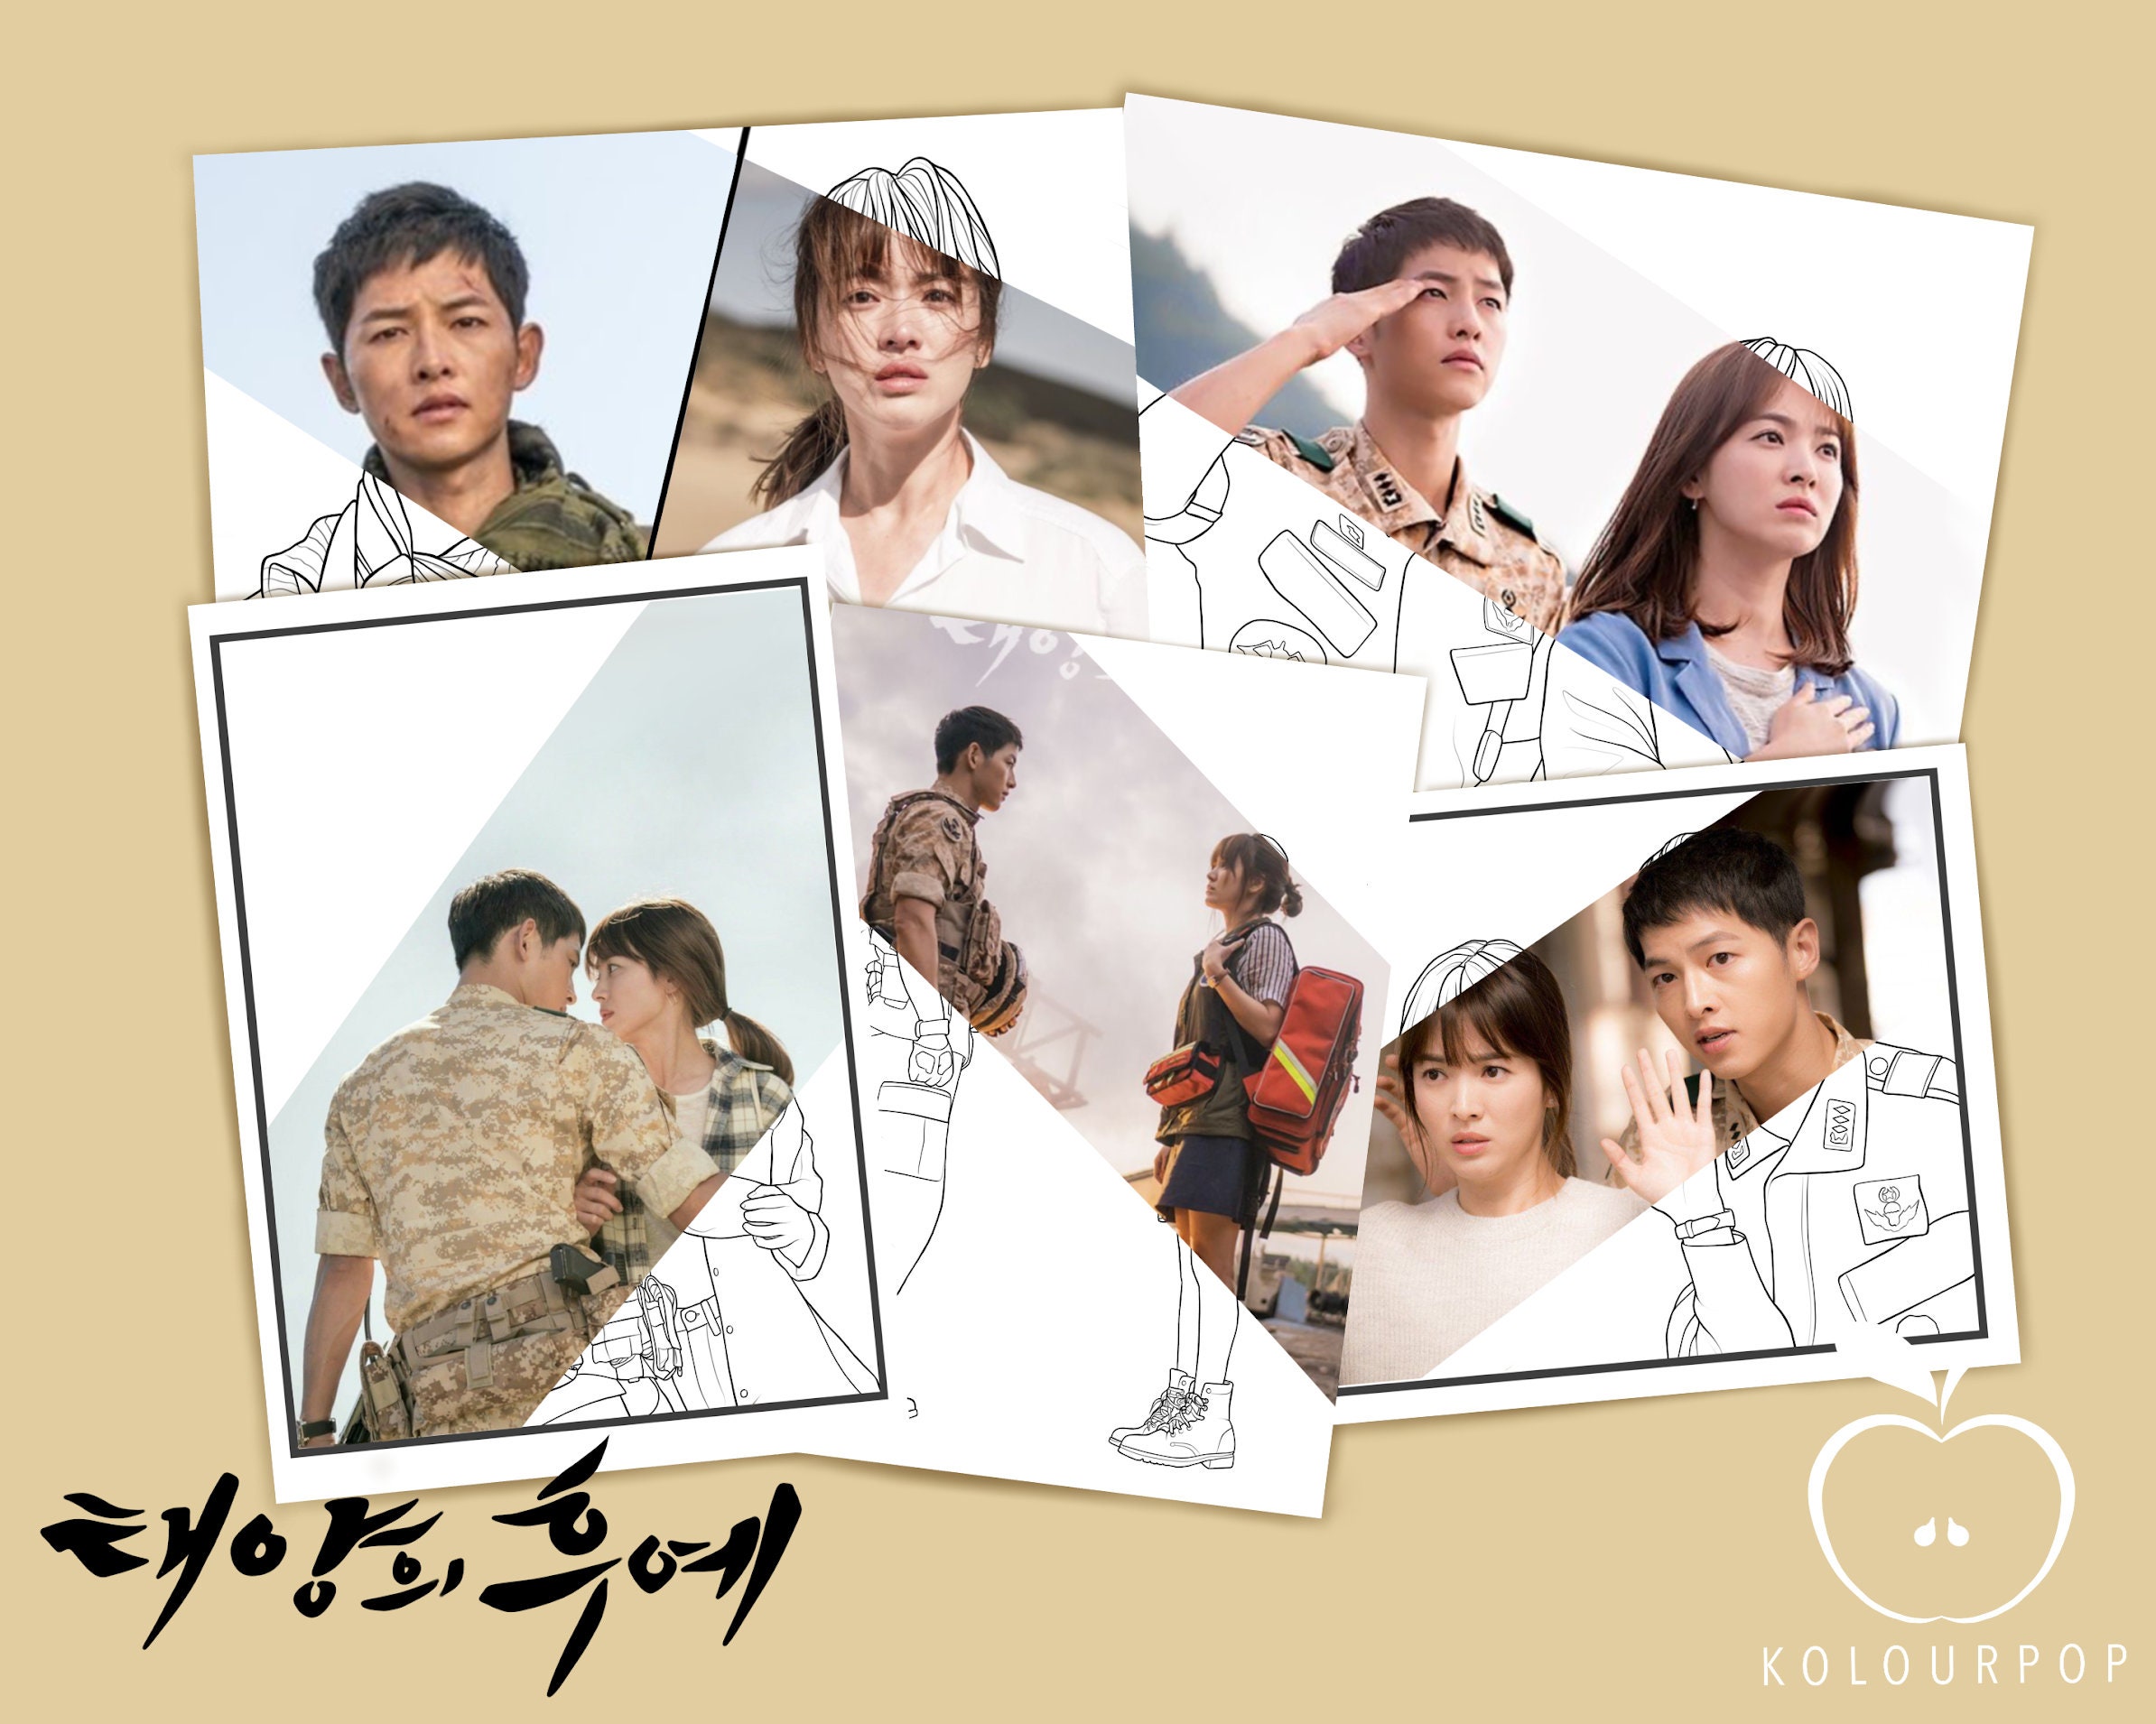 Song Joong Ki - Descendants of the Sun Poster for Sale by fancyitup